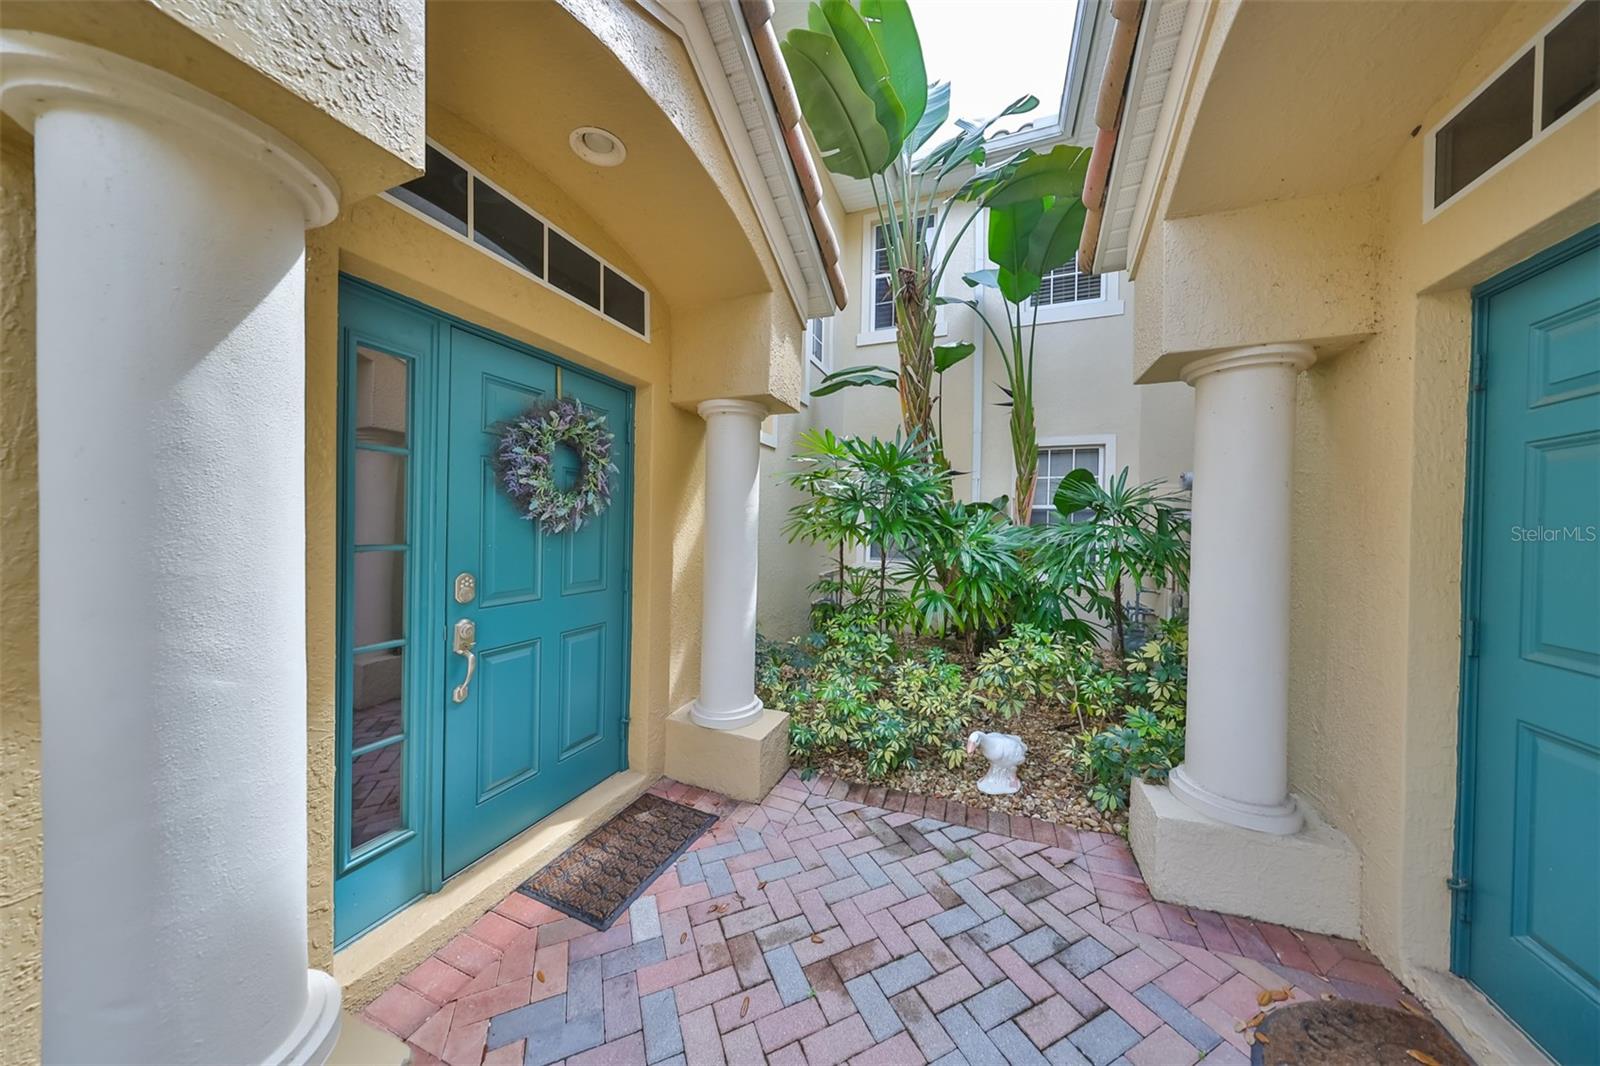 Front entrance of this luxury Tuscan-style condo unit is beautifully manicured and well maintained. Side lights and overhead windows allow Florida sunshine into the condo.